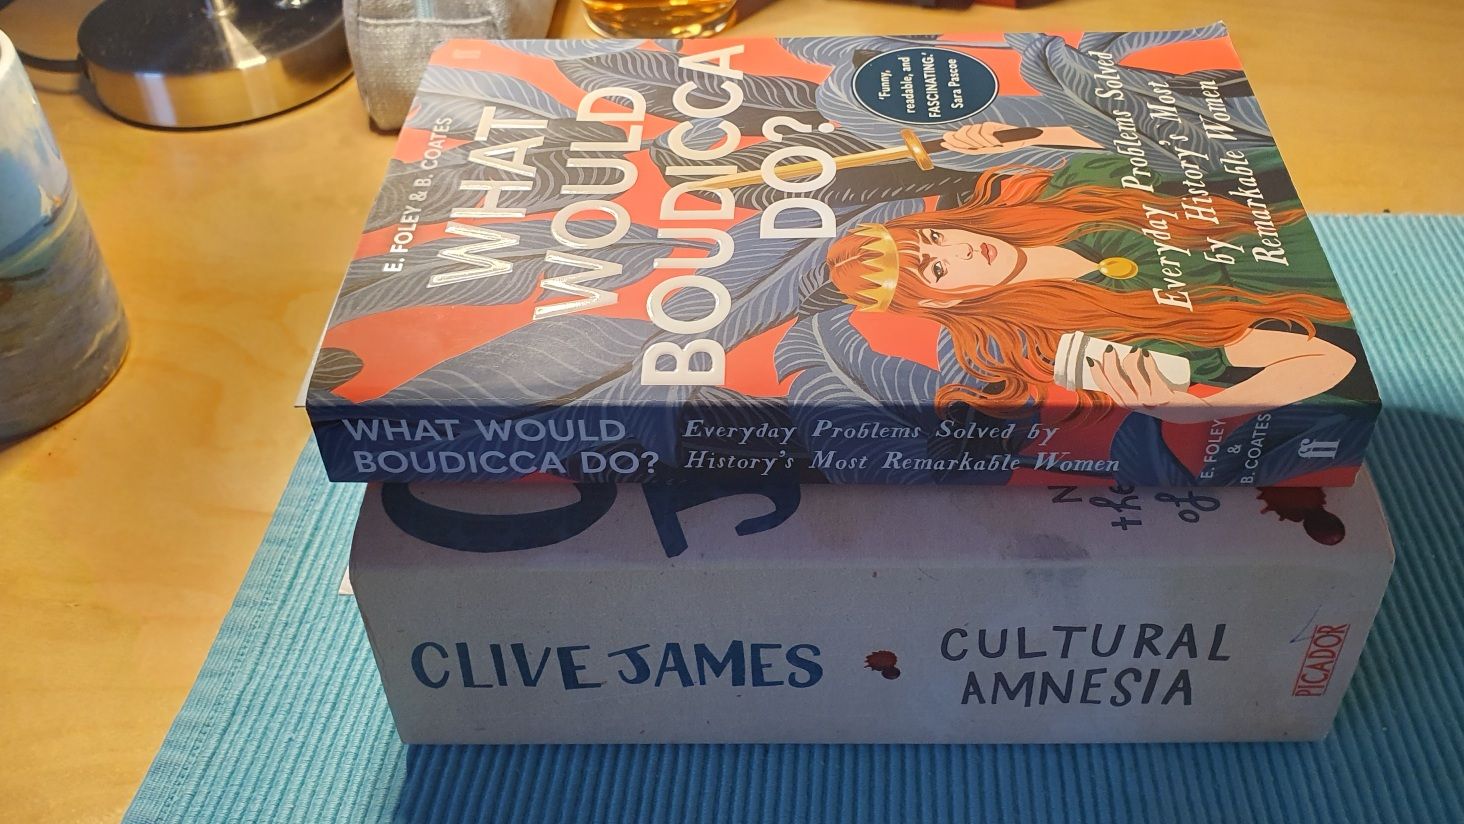 Photo of two books stacked on one another: Clive James Cultural Amnesia and What would Boudicca do